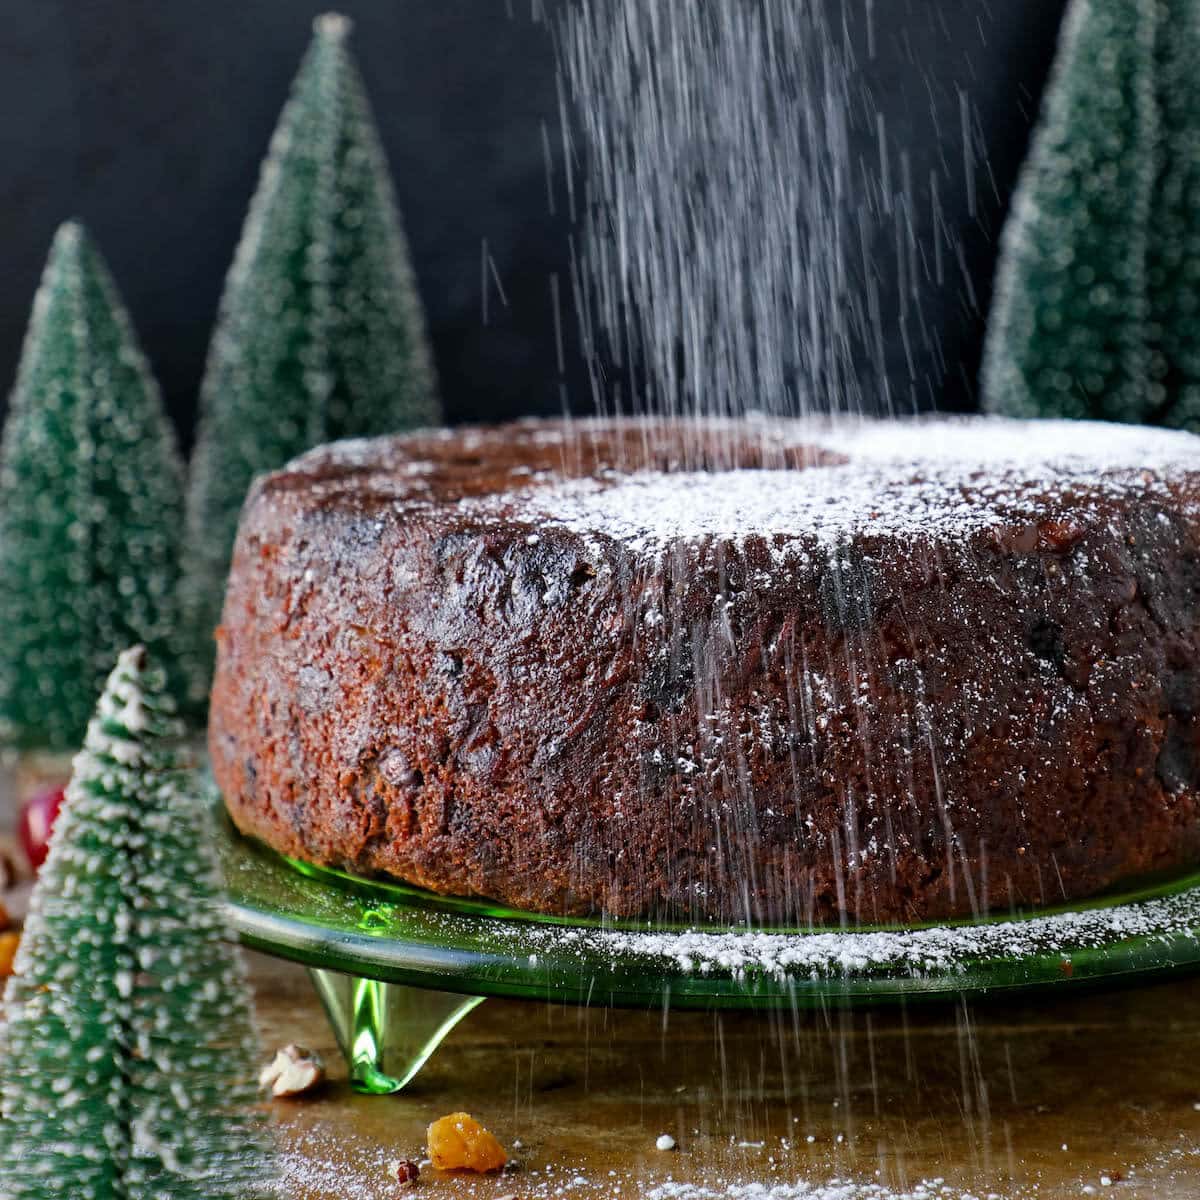 fruit cake unsliced being dusted with confectioners sugar.